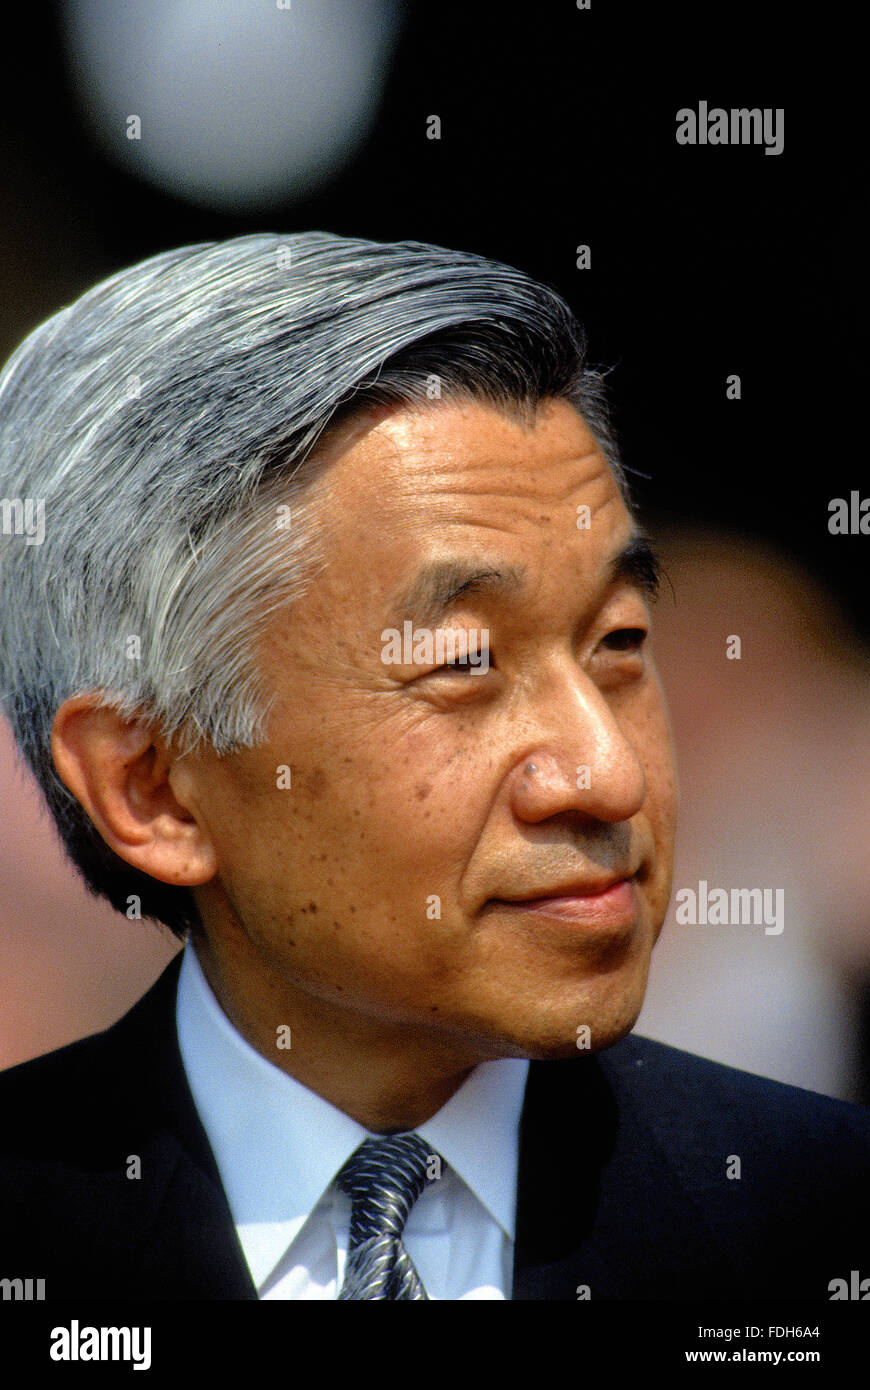 Washington, DC., USA, 13th June, 1994 Japanese Emperor Akihito speaks at the podium during the welcoming ceremony for his Official State Visit to the White House.  Akihito is the reigning Emperor of Japan, the 125th emperor of his line according to Japan's traditional order of succession. He acceded to the throne in 1989. Credit: Mark Reinstein Stock Photo